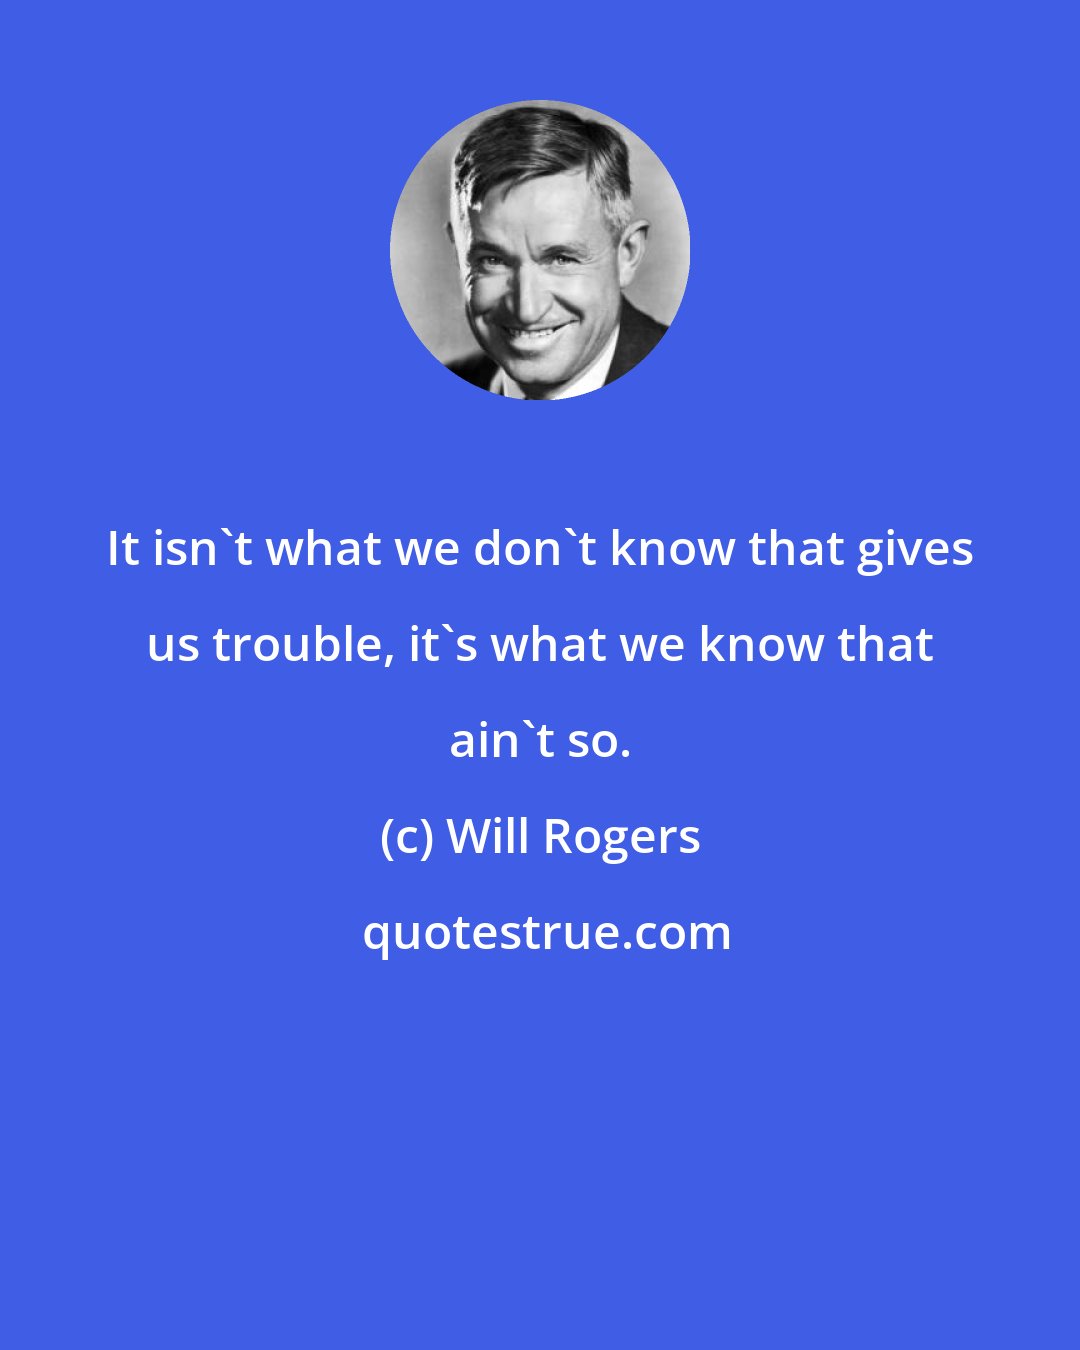 Will Rogers: It isn't what we don't know that gives us trouble, it's what we know that ain't so.